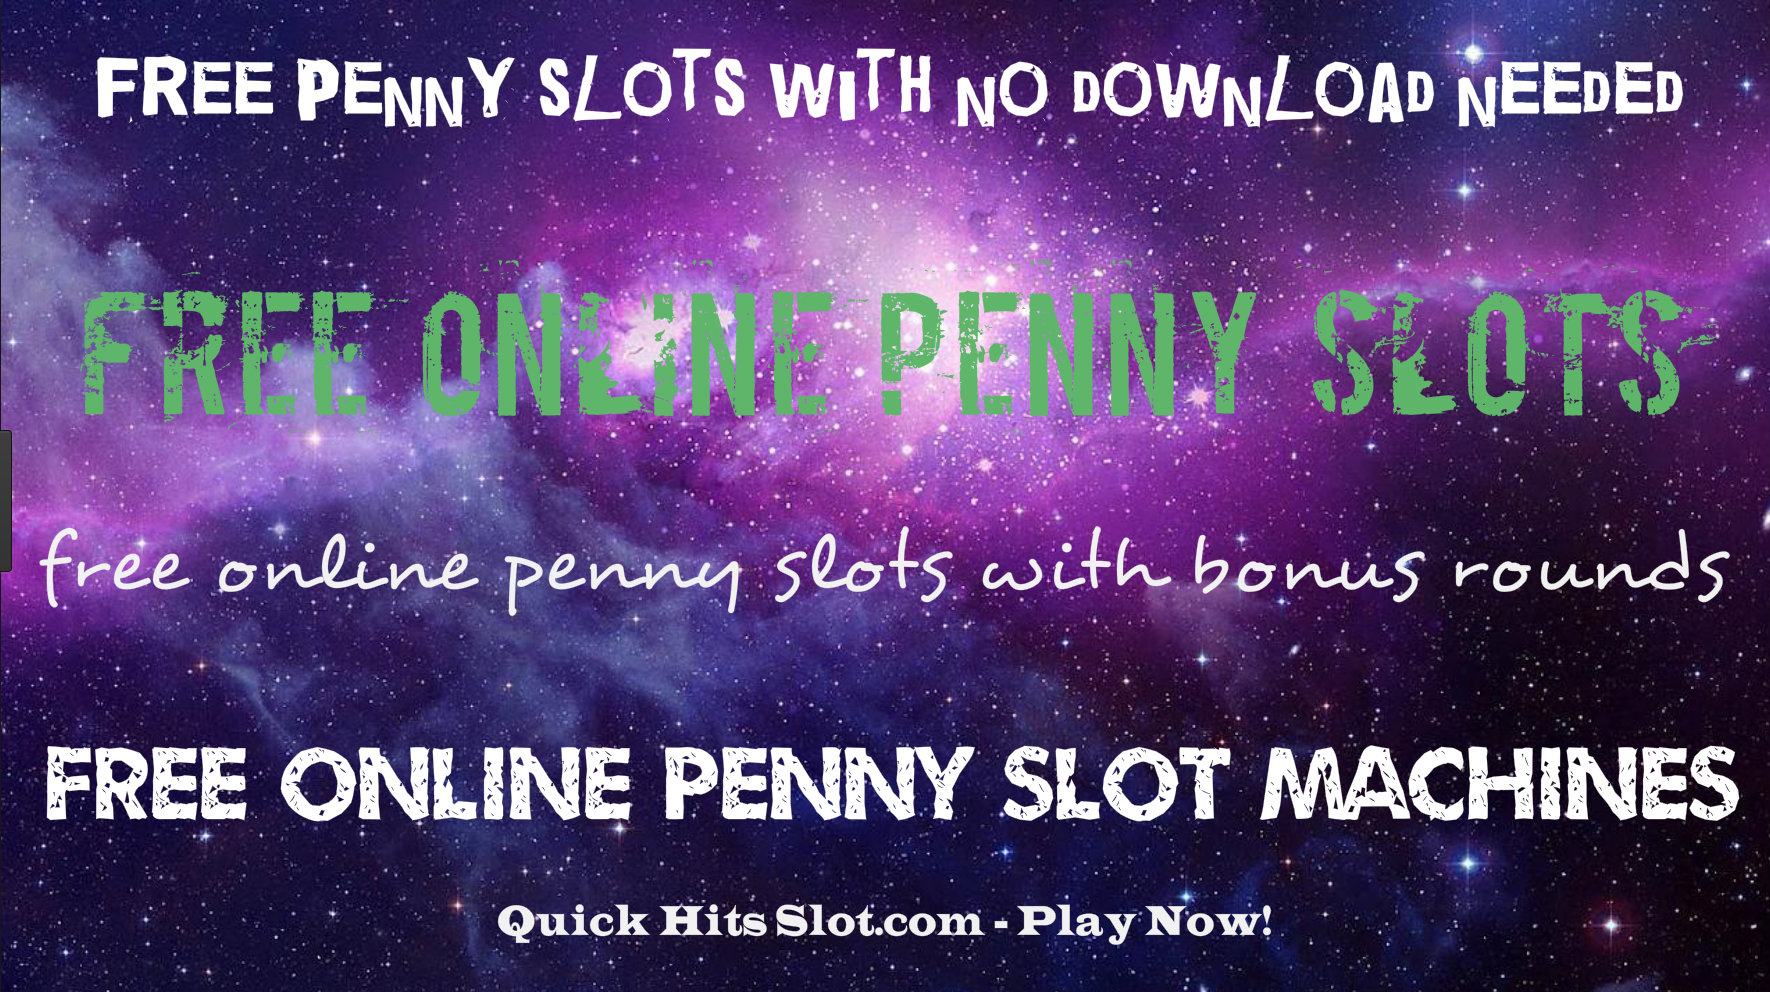 free penny slots no download needed